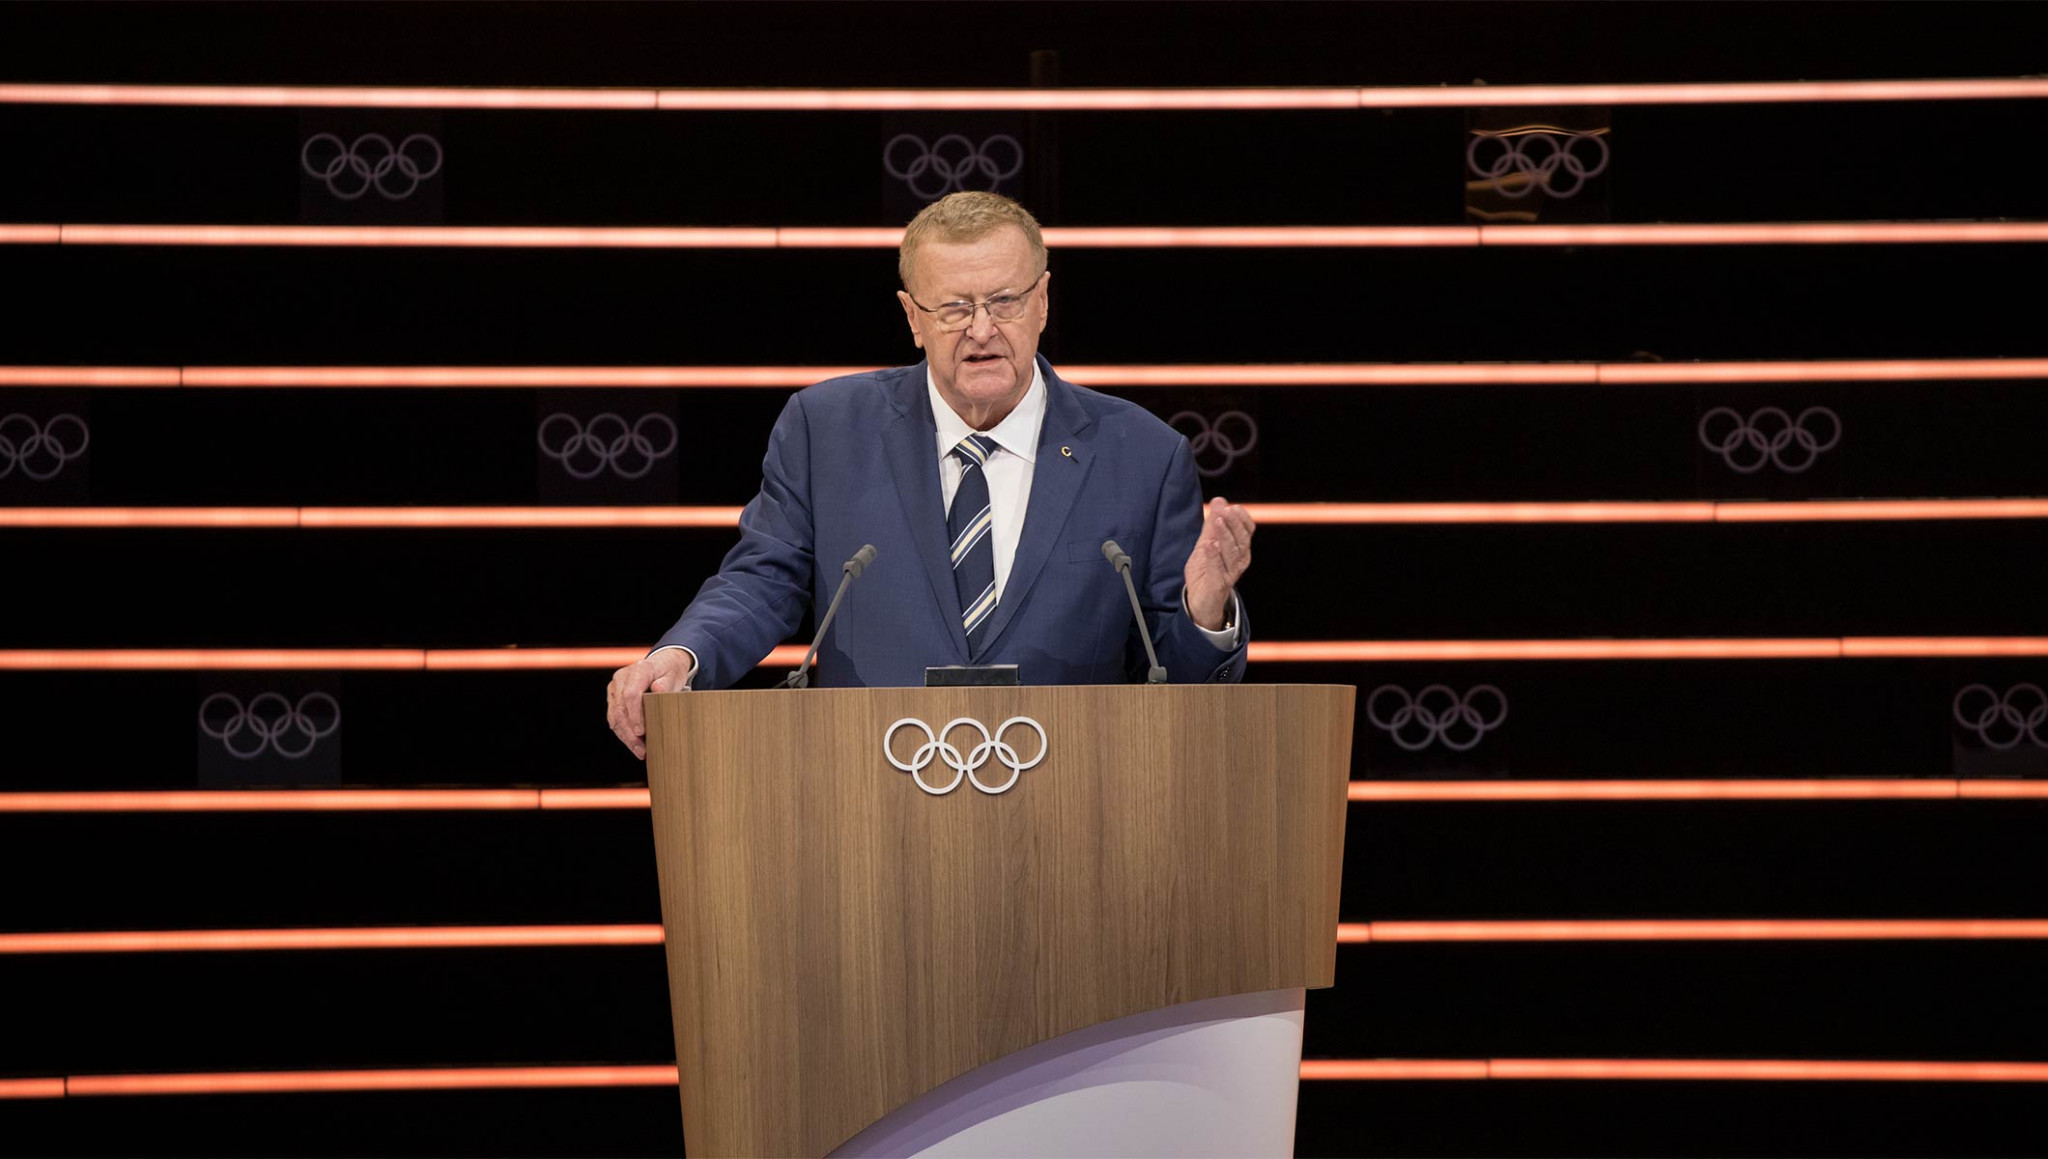 The changes were made following proposals made by a working group chaired by John Coates ©IOC